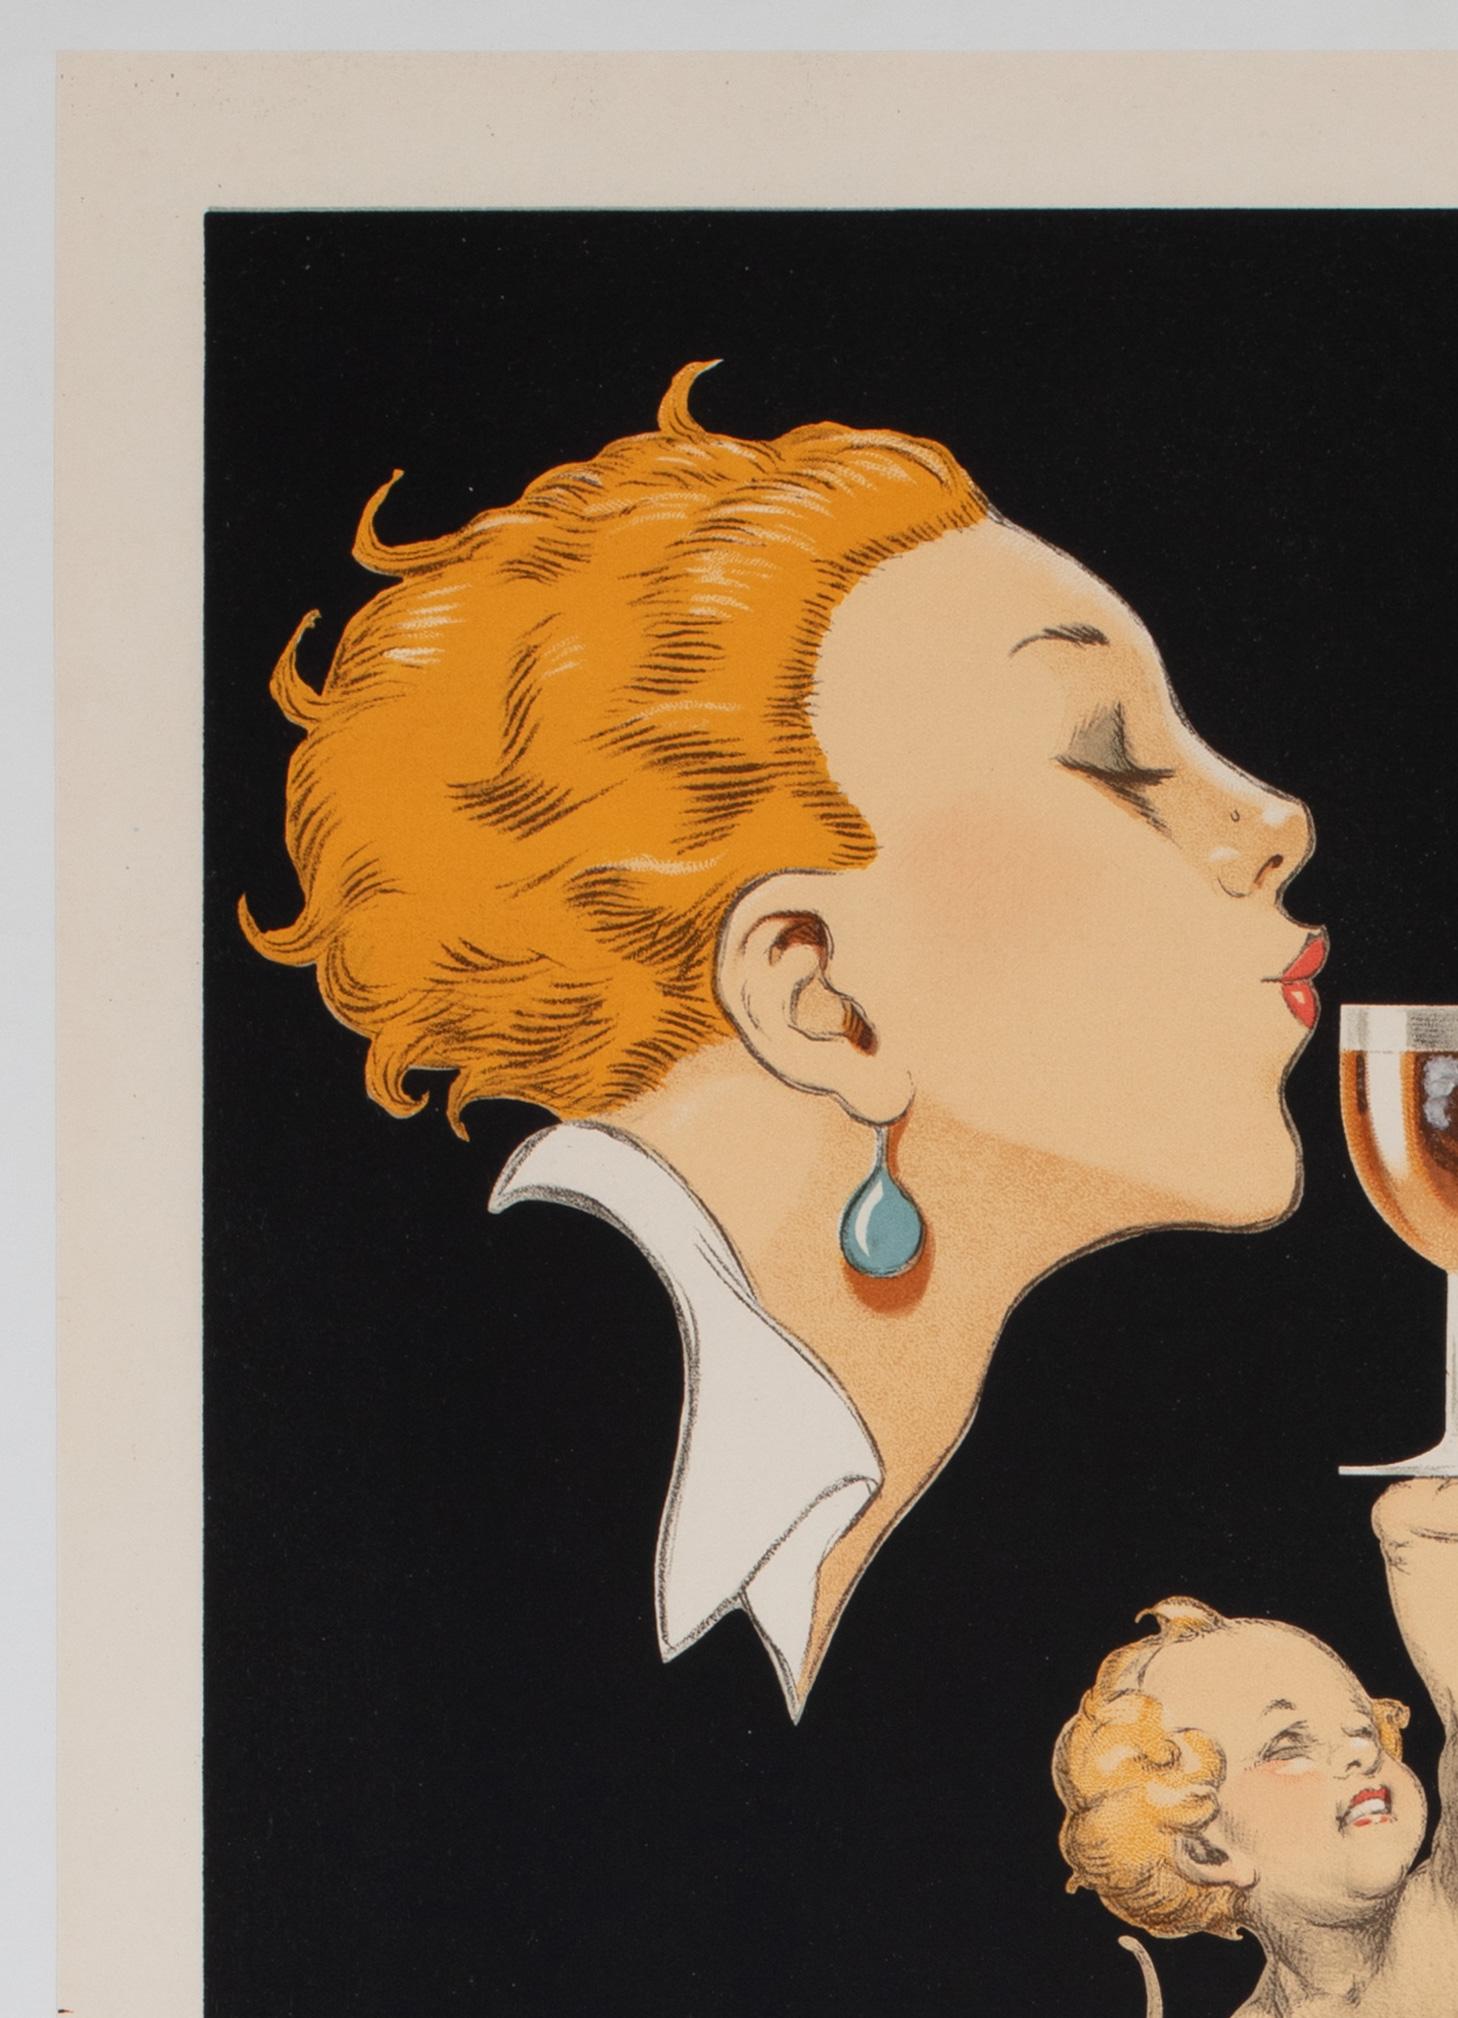 Porto Ramos c1920 French Alcohol Advertising Poster, Rene Vincent In Excellent Condition For Sale In Bath, Somerset